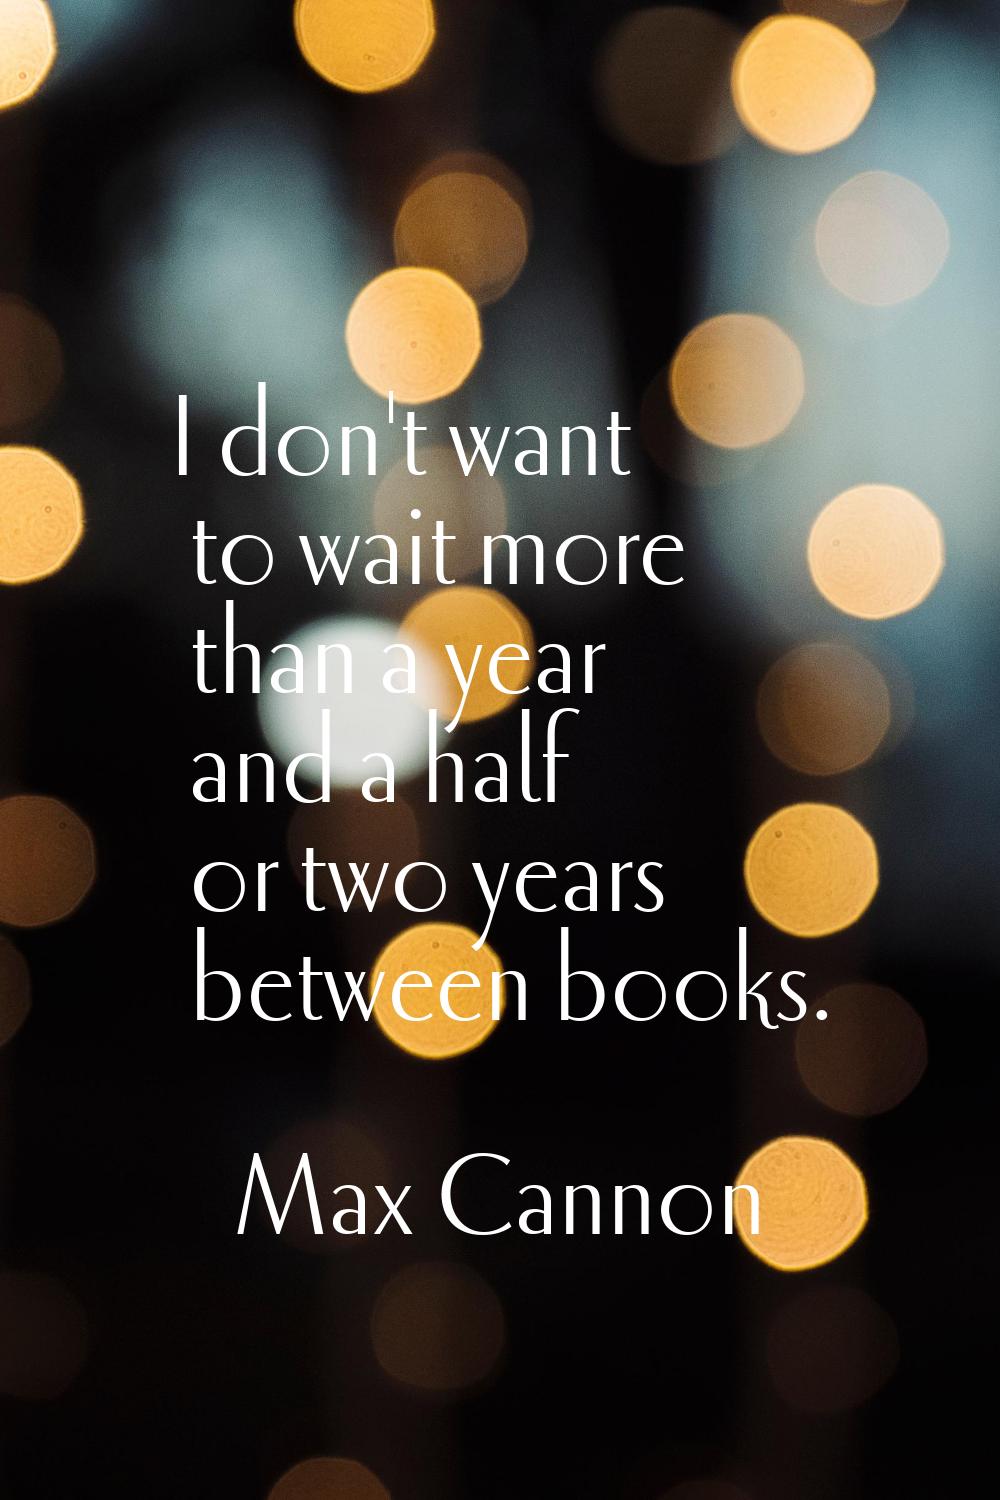 I don't want to wait more than a year and a half or two years between books.